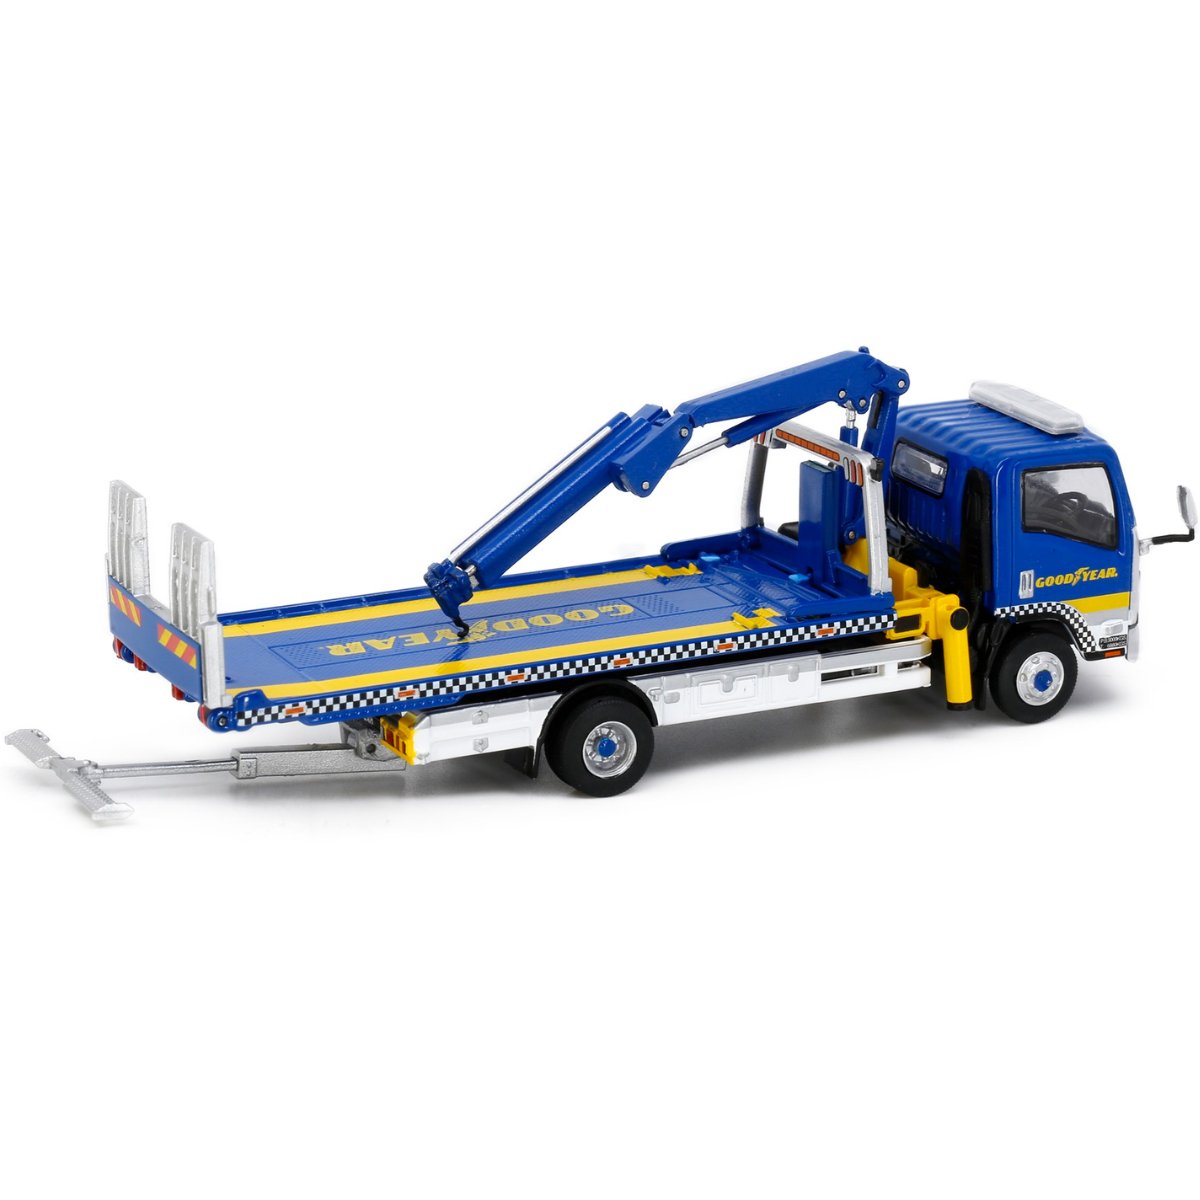 Tiny Models Isuzu N Series Flatbed Tow Truck With Crane - Goodyear (1:76 Scale) - Phillips Hobbies